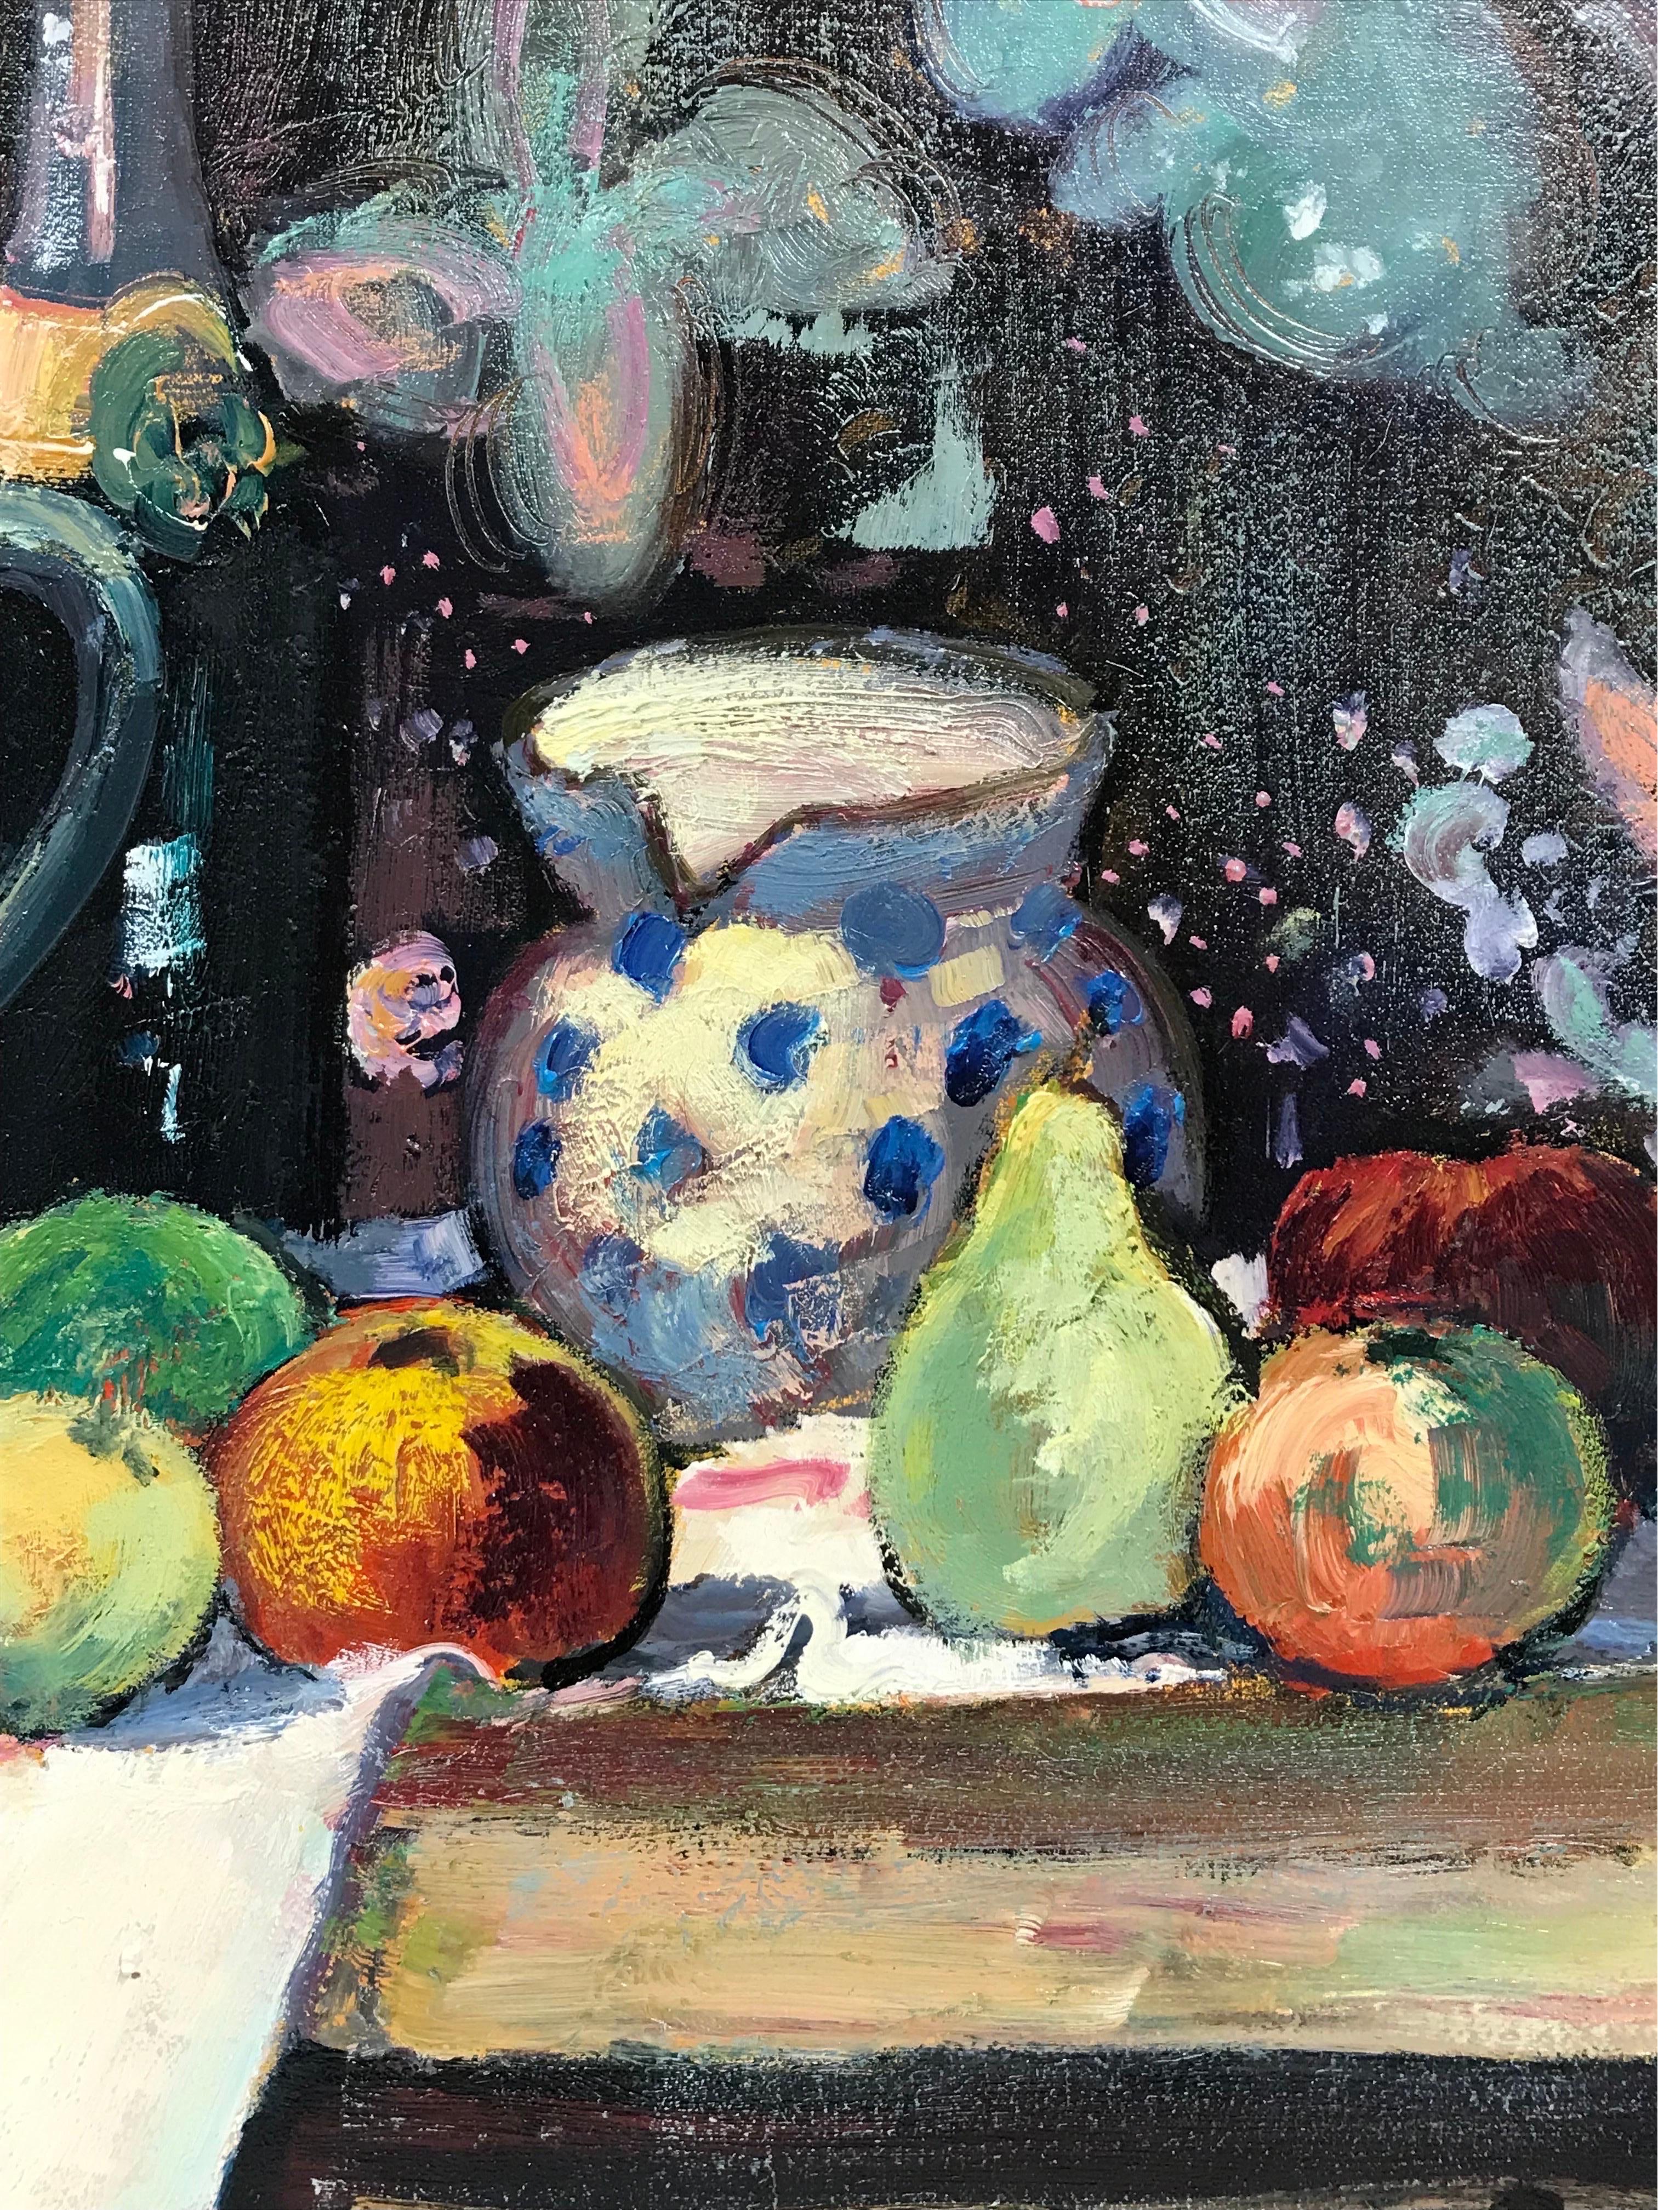 Artist/ School: signed Guy Benard (French, contemporary)

Title: 'Nature Morte'

Medium: oil on canvas, unframed and inscribed verso

Canvas: 18 x 21.5 inches

Provenance: private collection, France

Condition: The painting is in overall very good